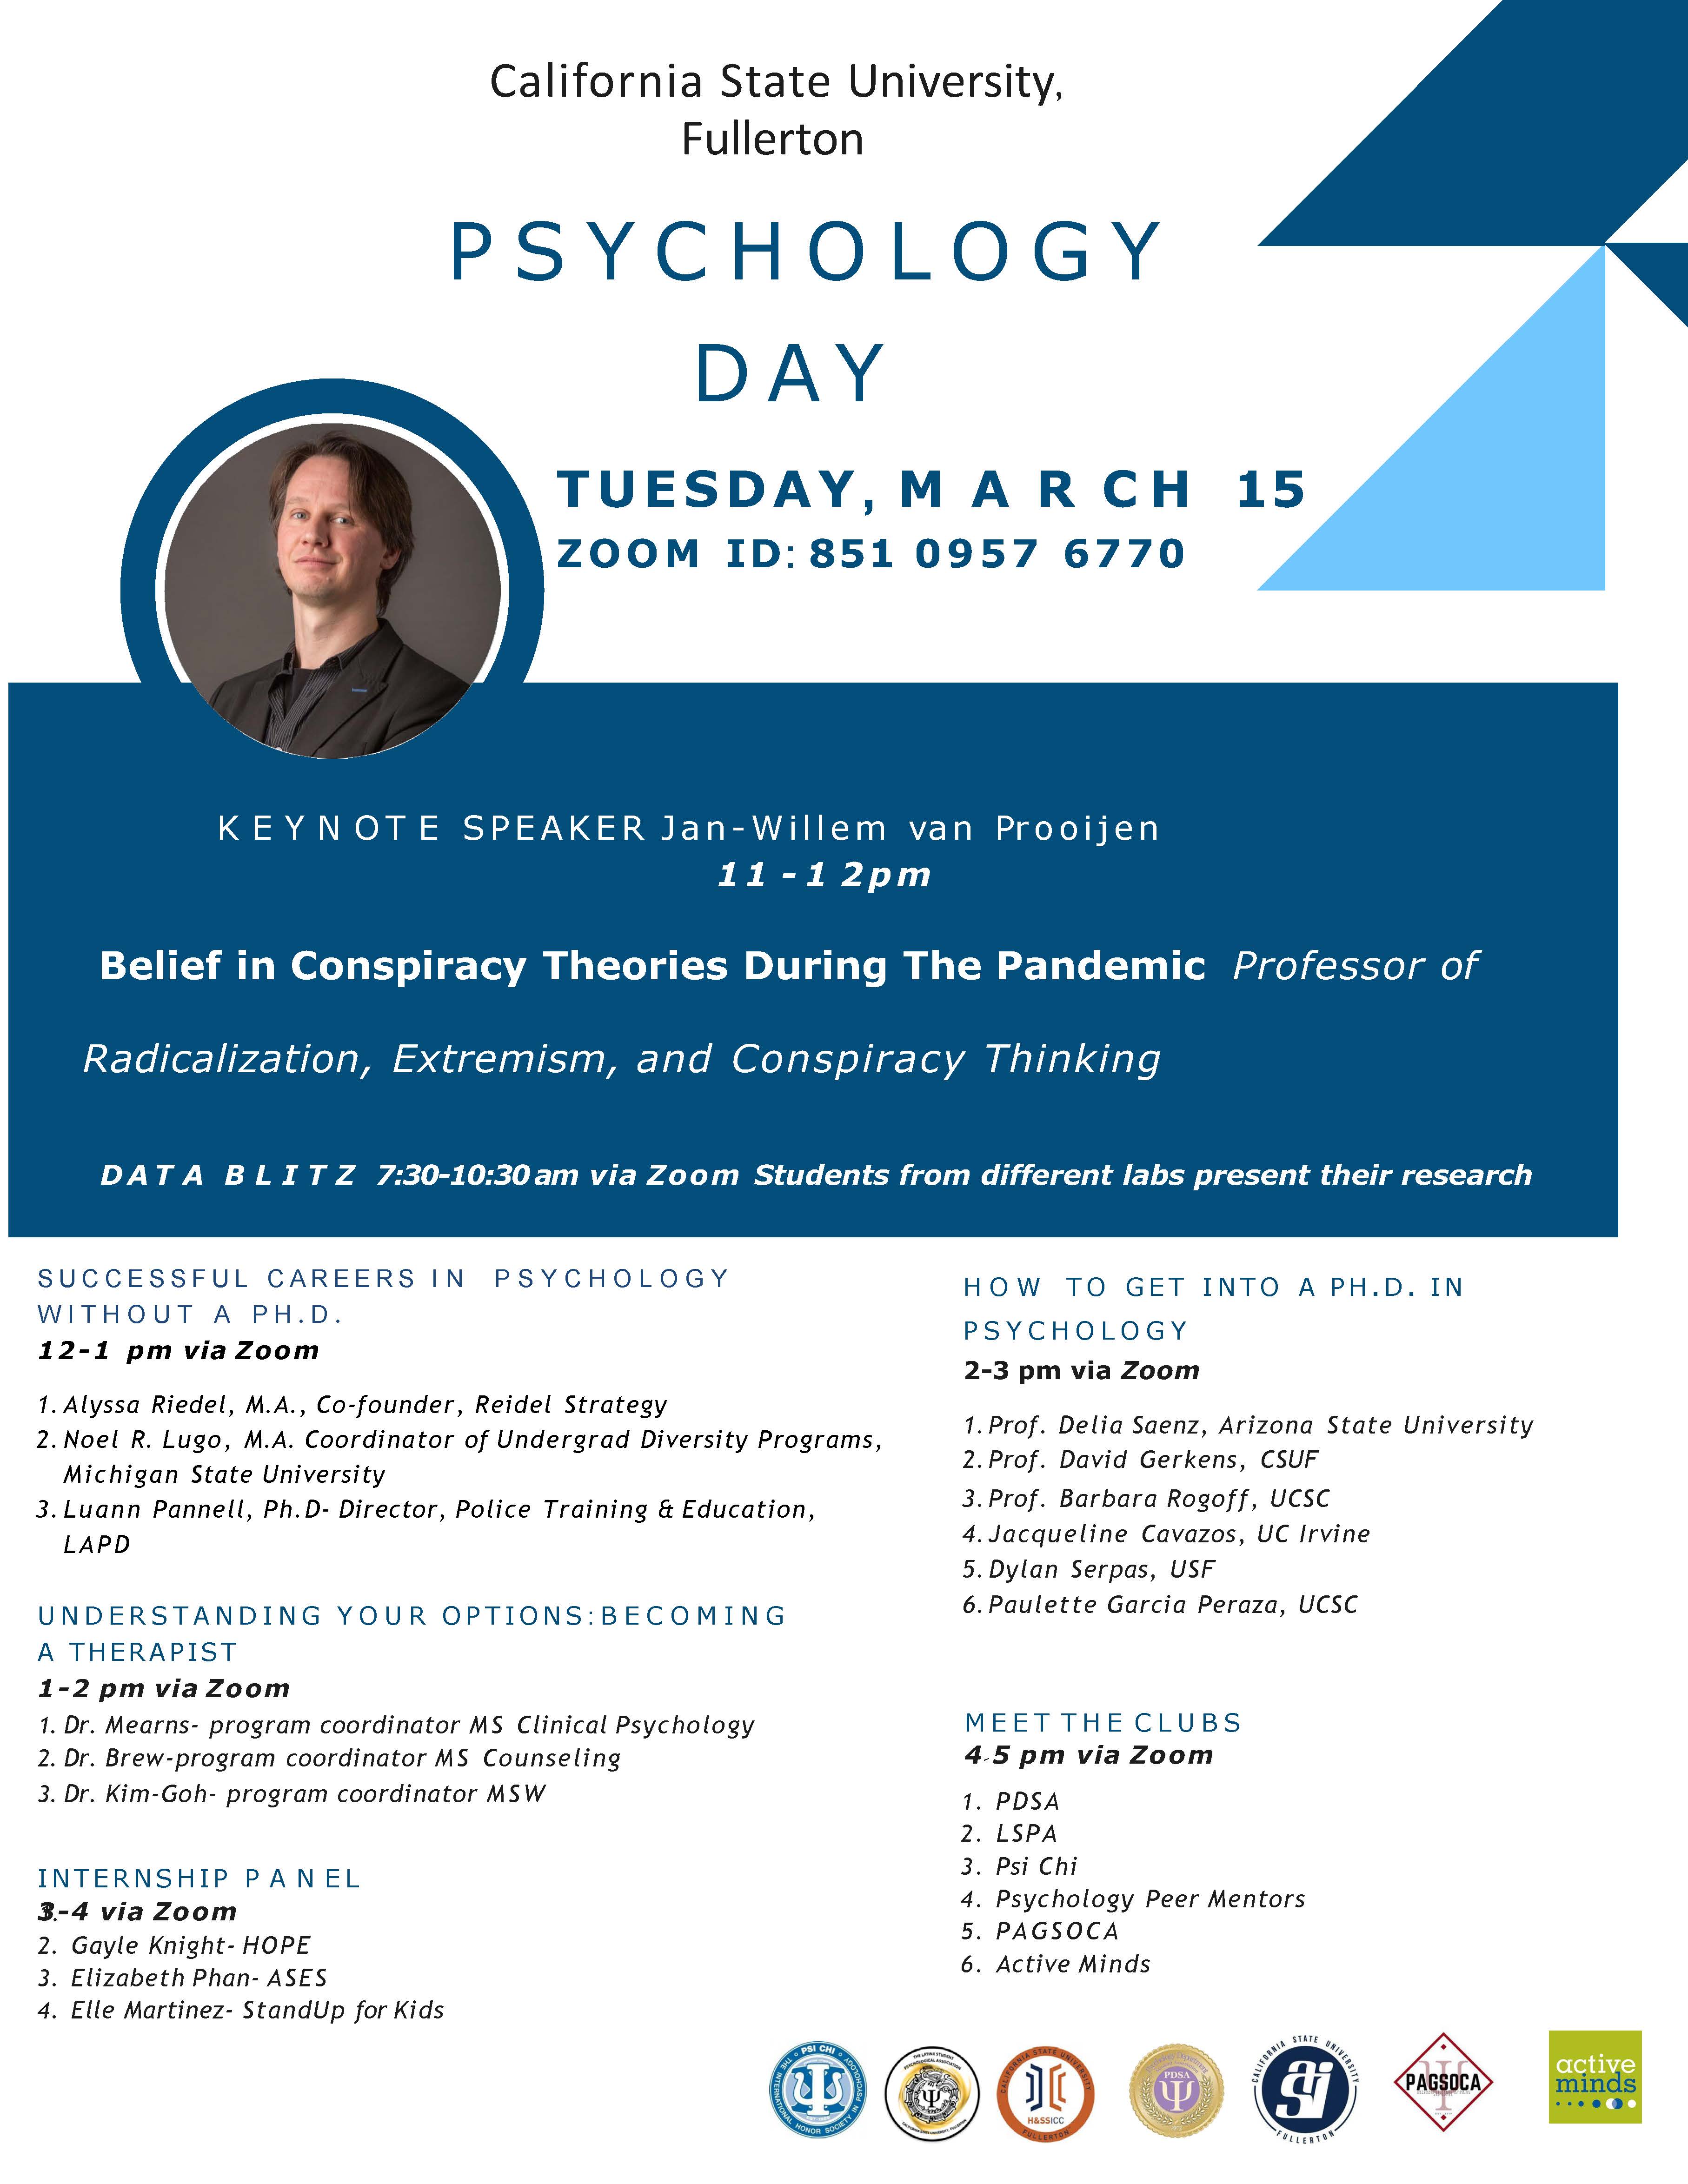 Psych Day Department of Psychology CSUF